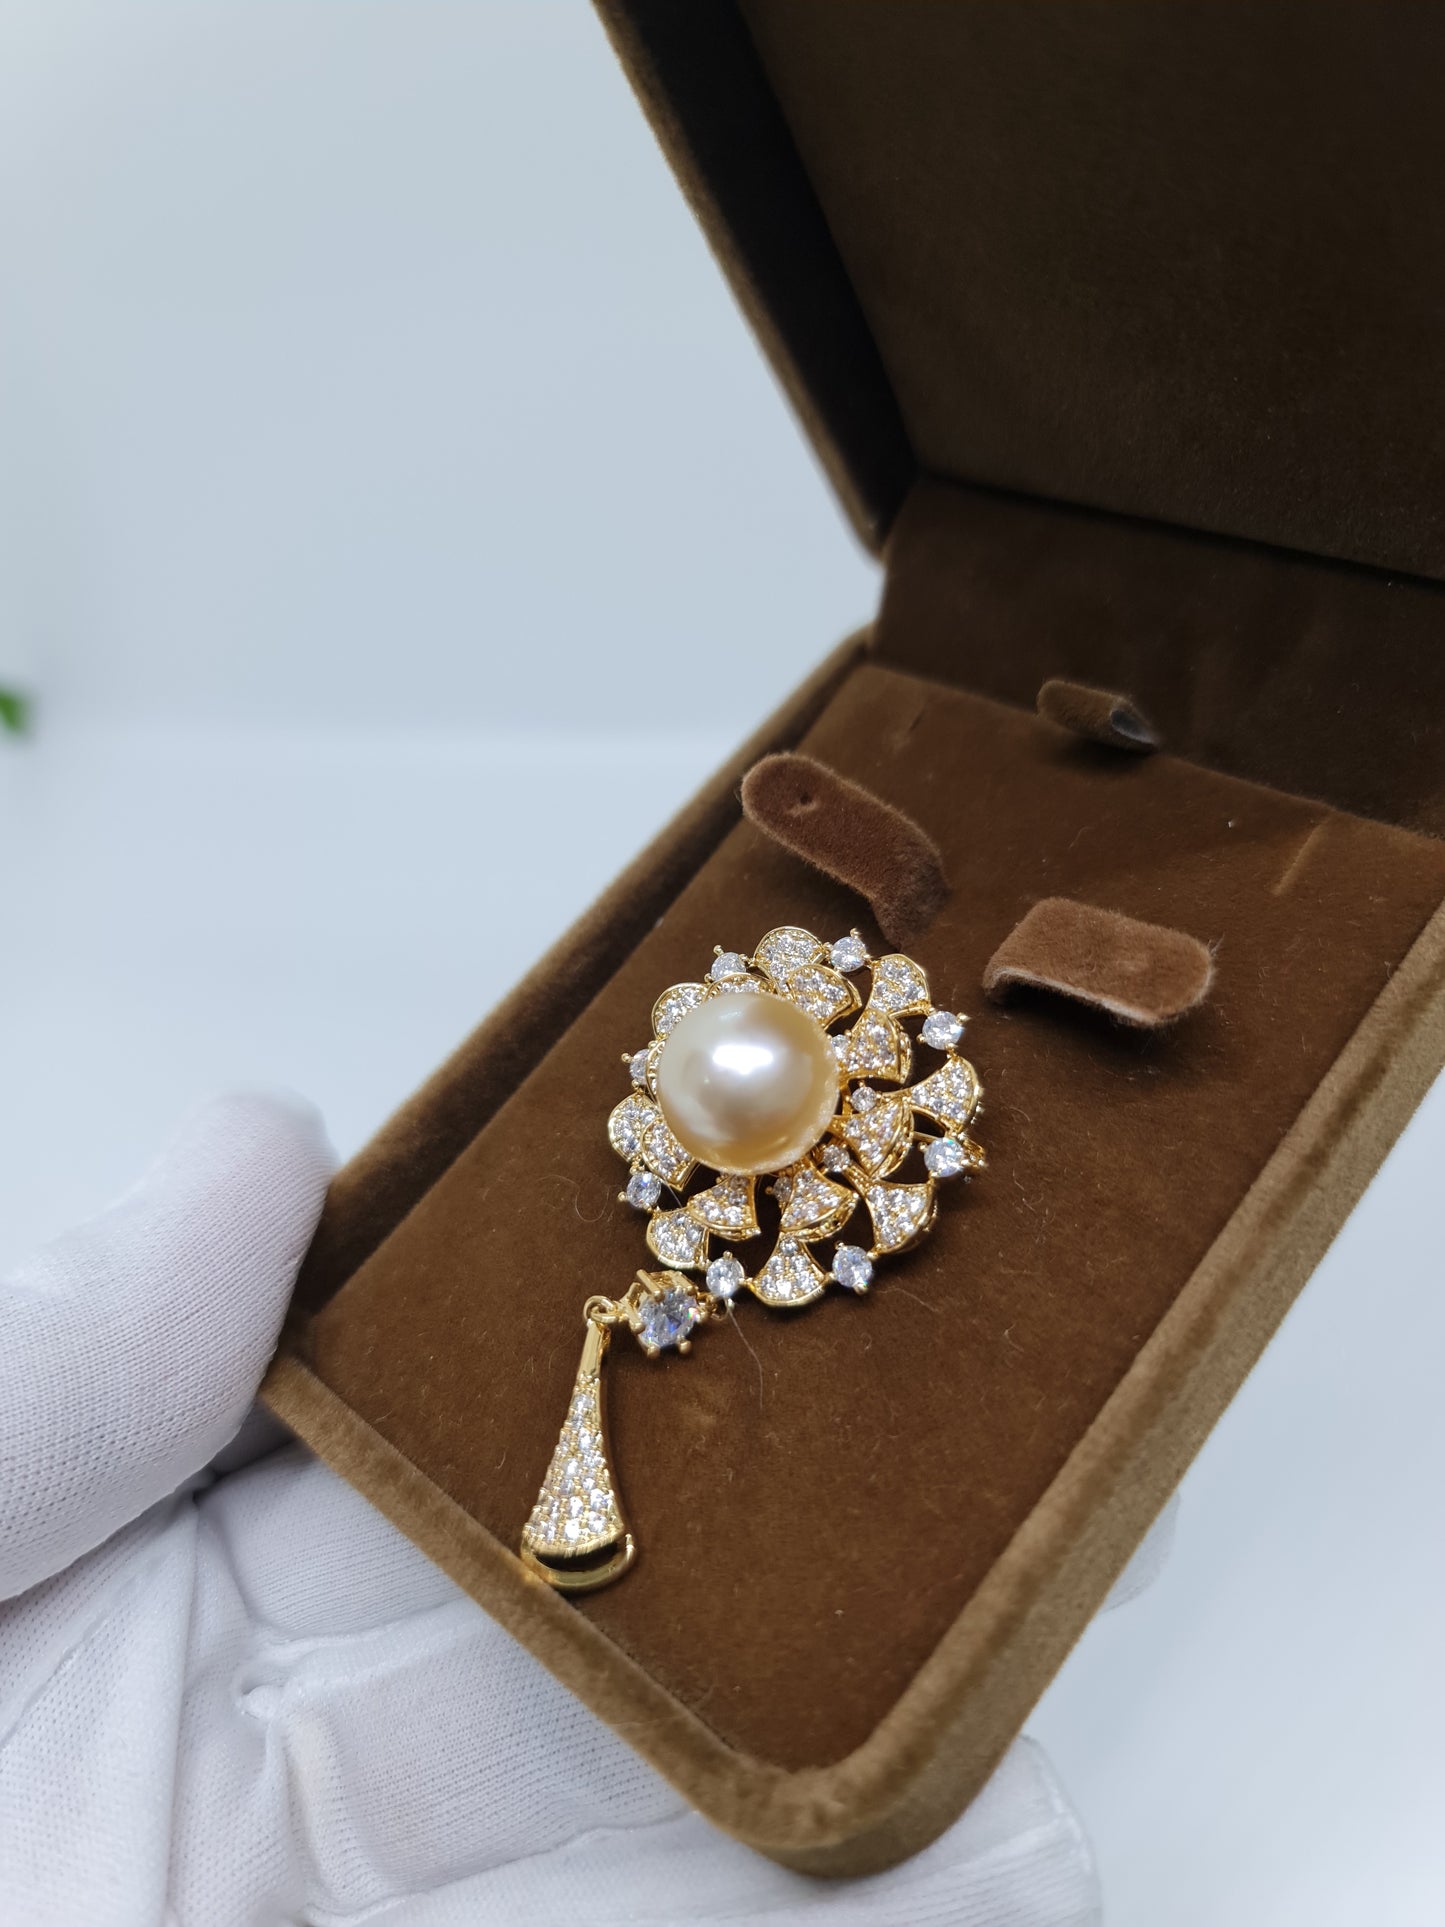 14mm Champagne South Sea Pearls Brooch Pendant Plated